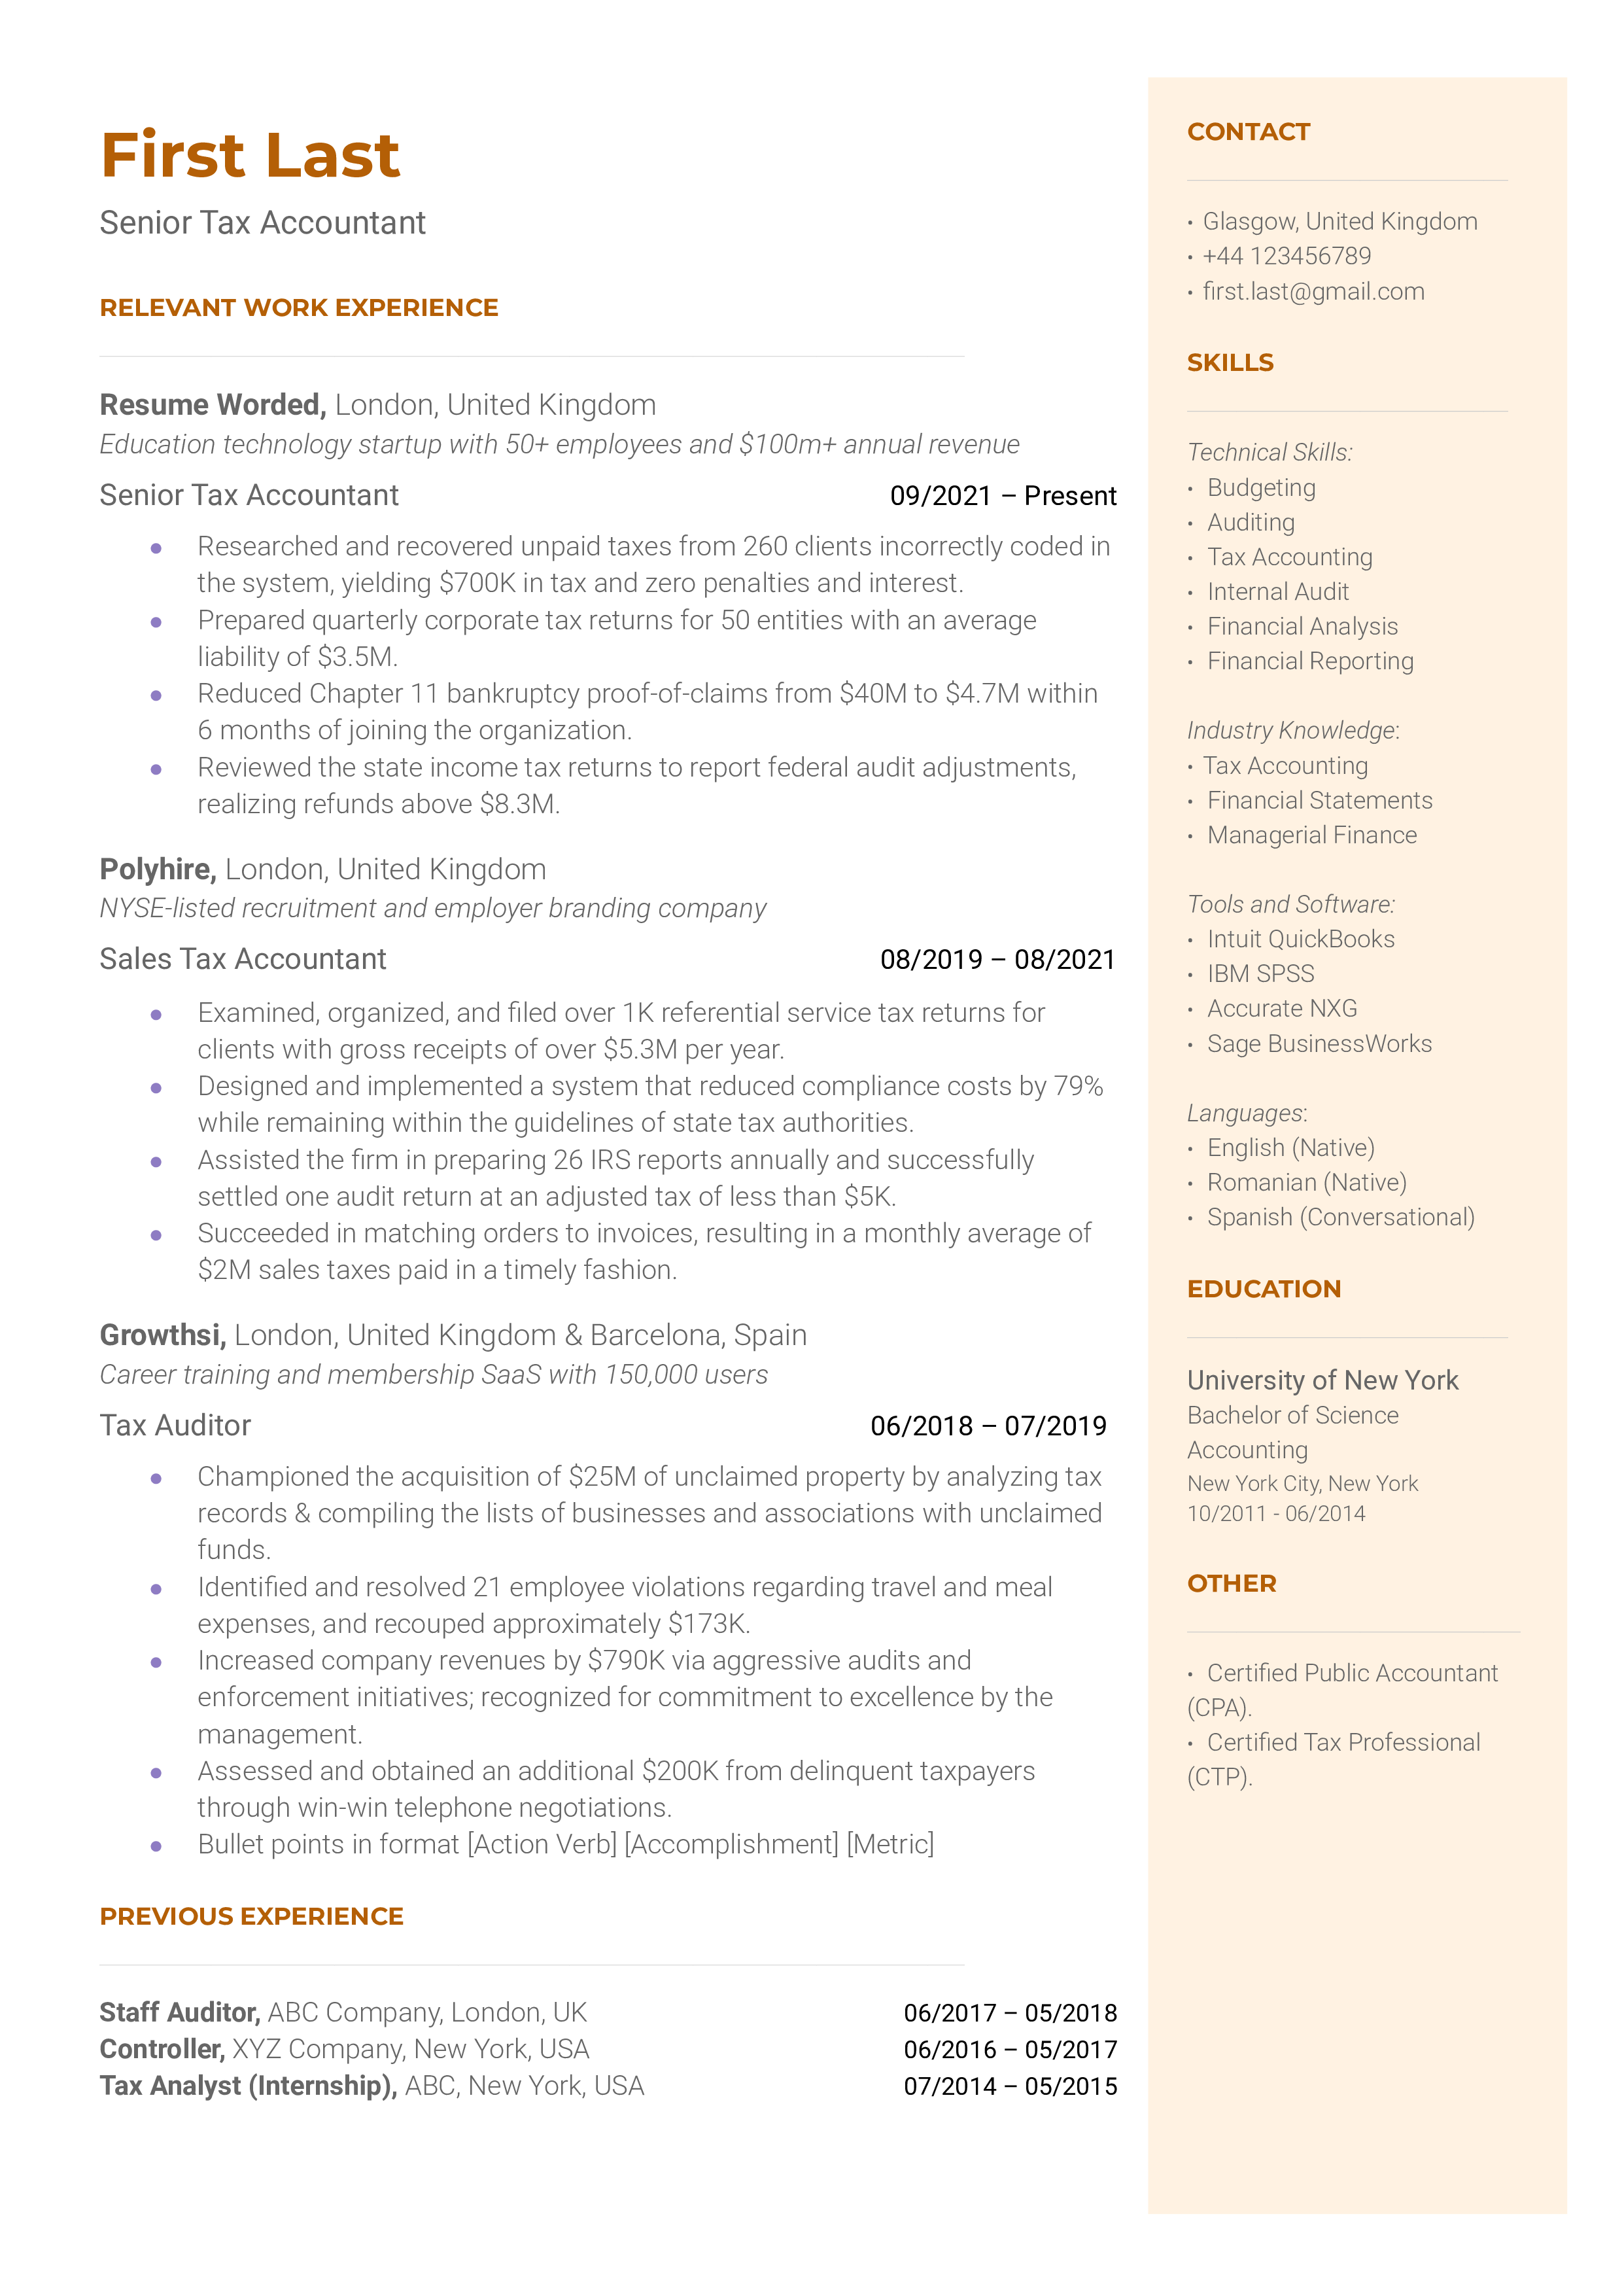 Professional resume outlining experience and skills for a Senior Tax Accountant role.